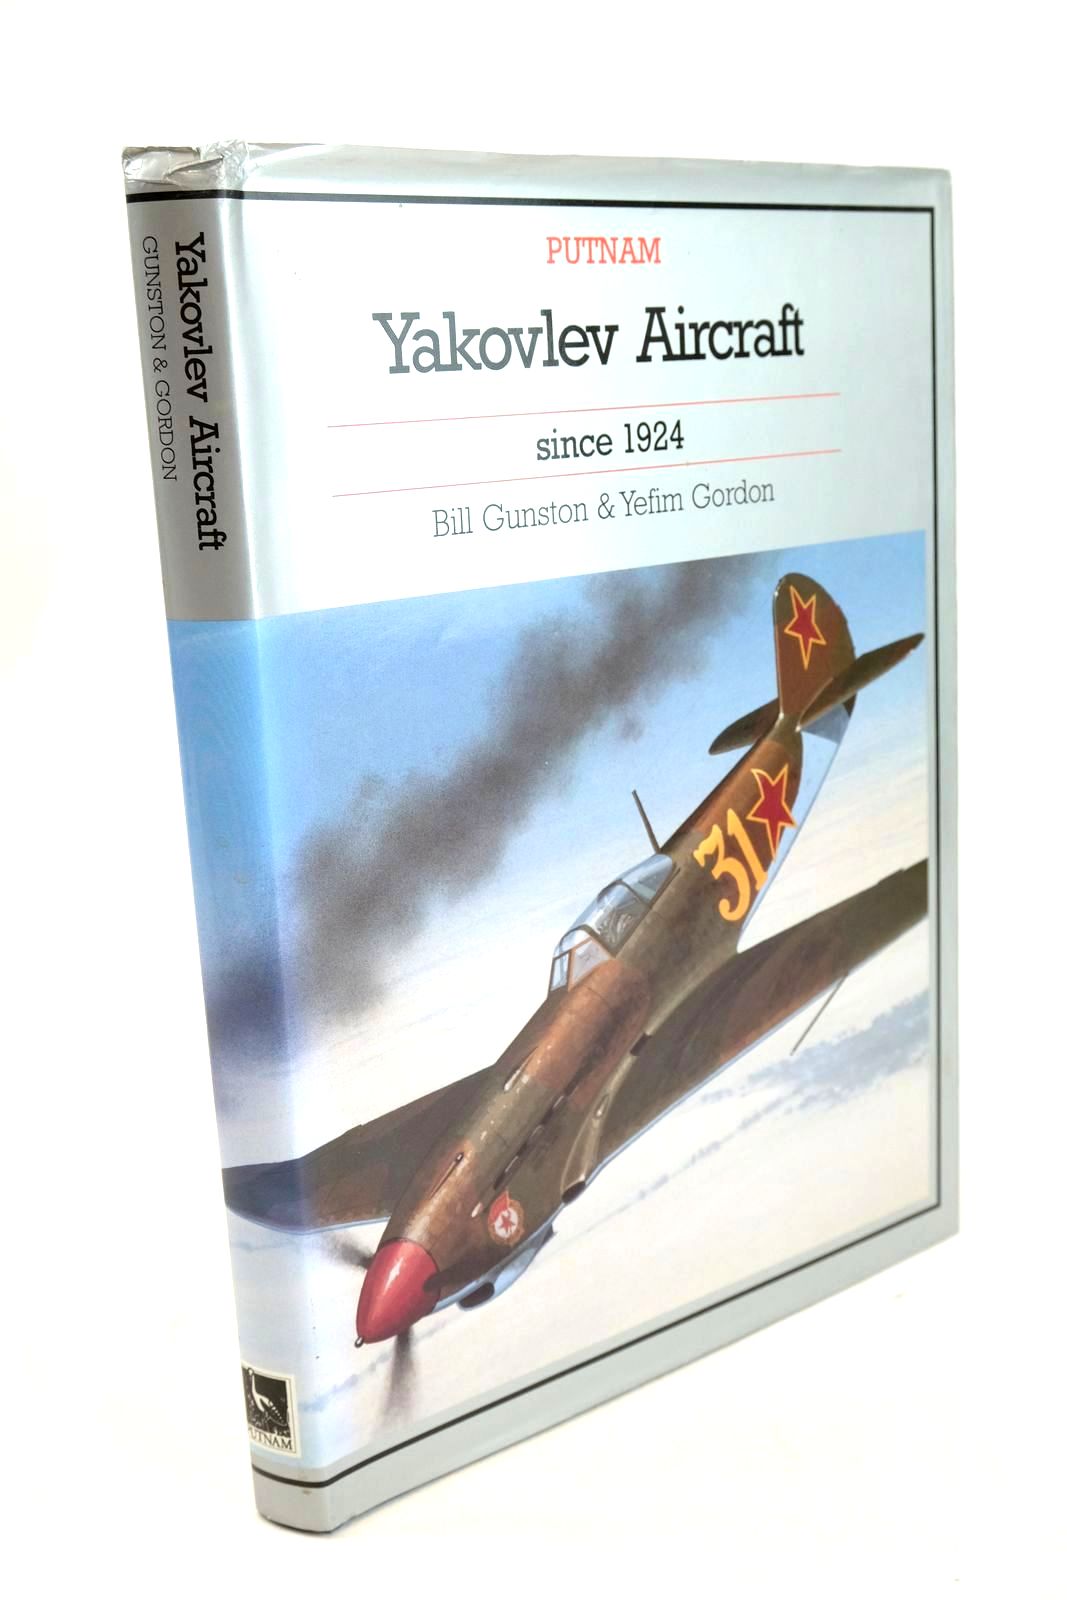 Photo of YAKOVLEV AIRCRAFT SINCE 1924 written by Gunston, Bill Gordon, Yefim published by Putnam (STOCK CODE: 1327983)  for sale by Stella & Rose's Books